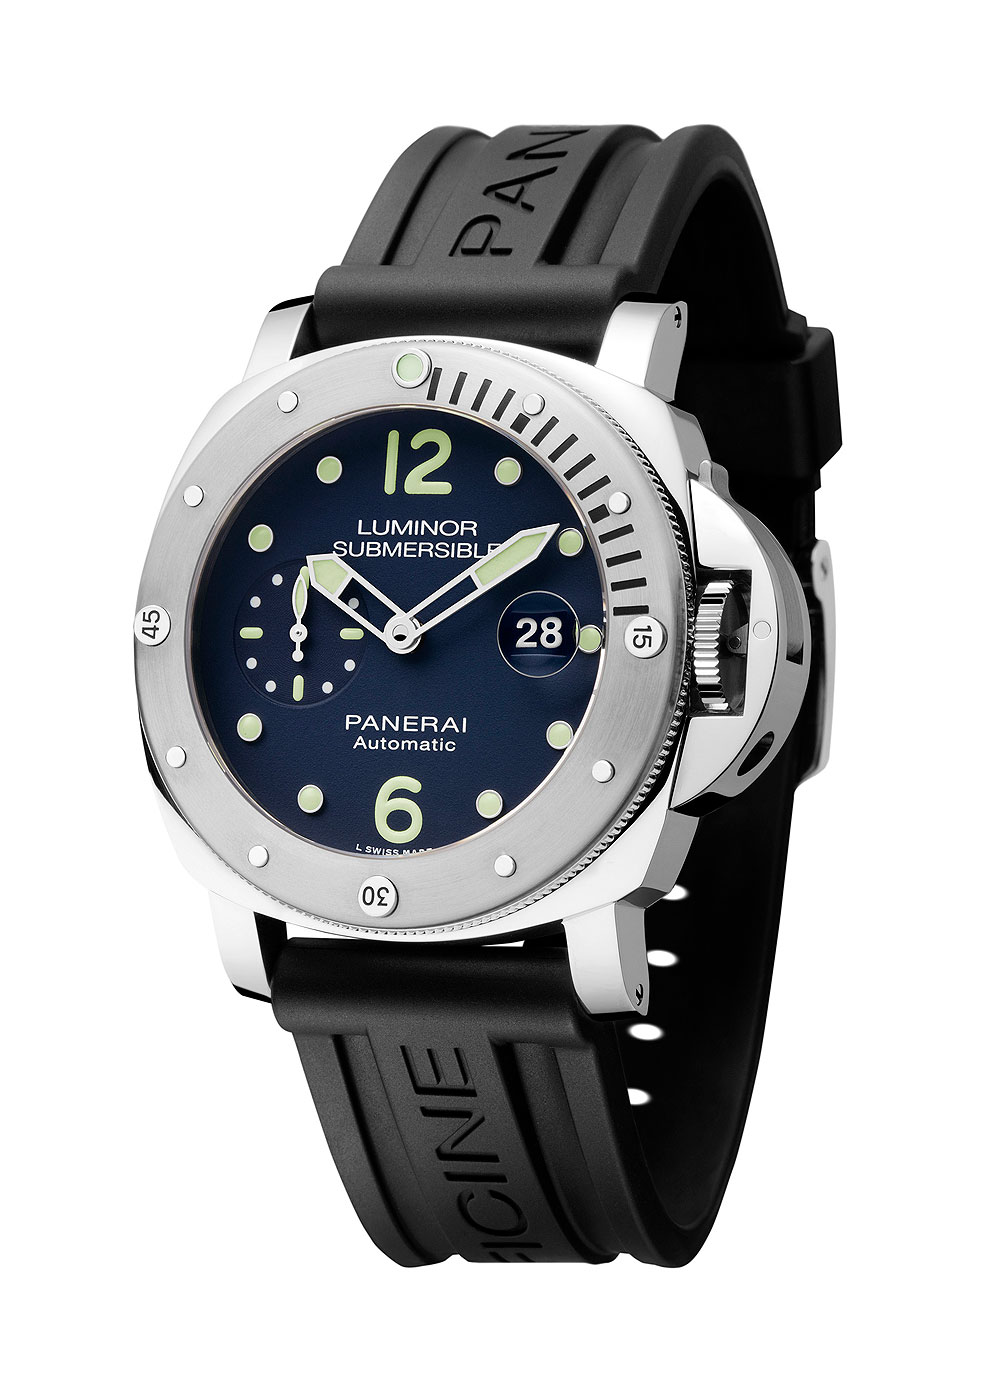 Panerai Launches E-Commerce with Limited-Edition Luminor Submersible